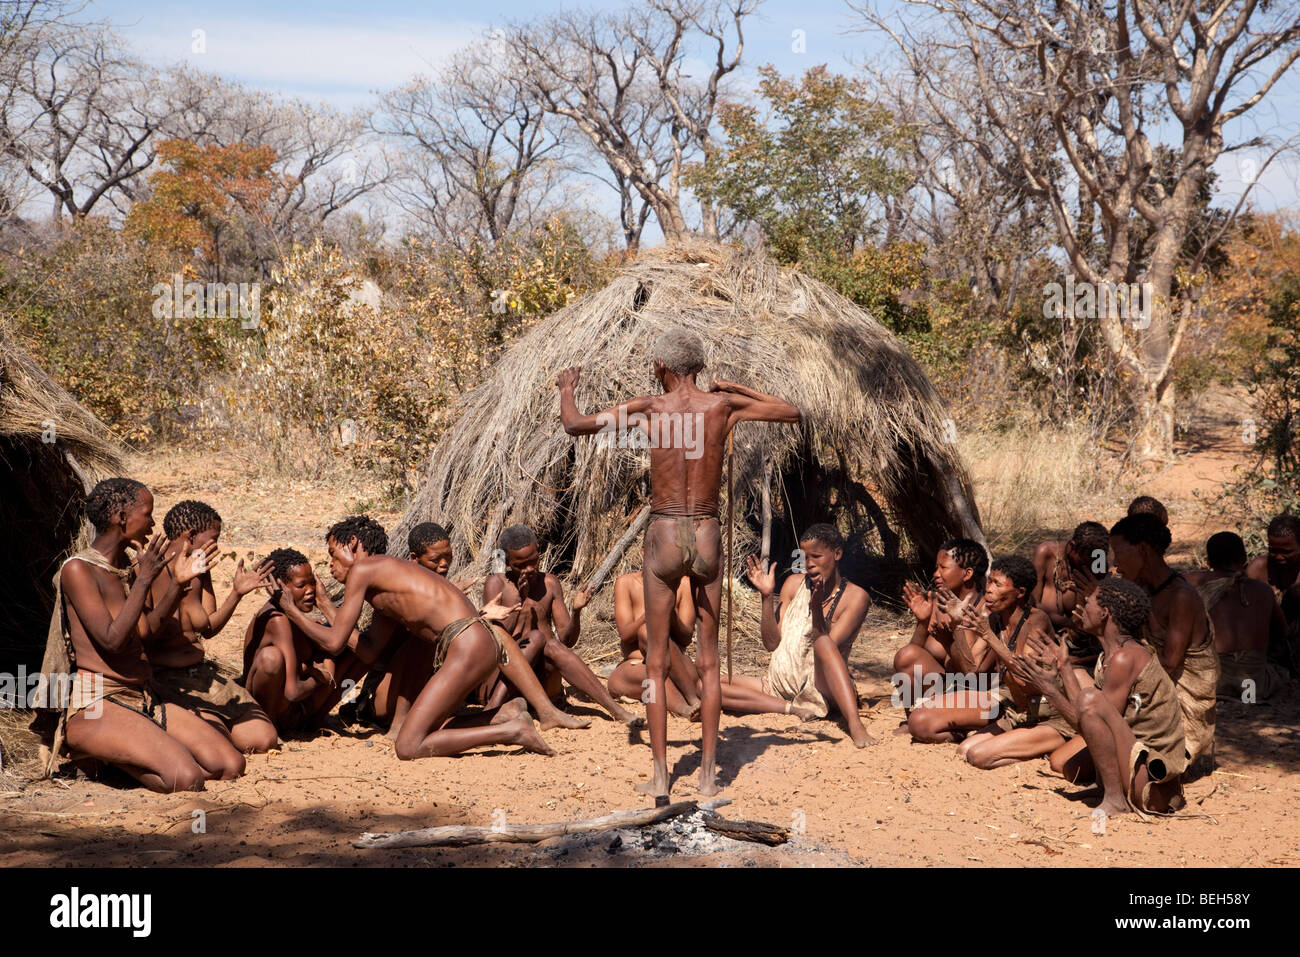 San village in Namiba on the edge of the Kalahari desert. The farewell dance, a hunter prepares to go out into the bush to hunt Stock Photo